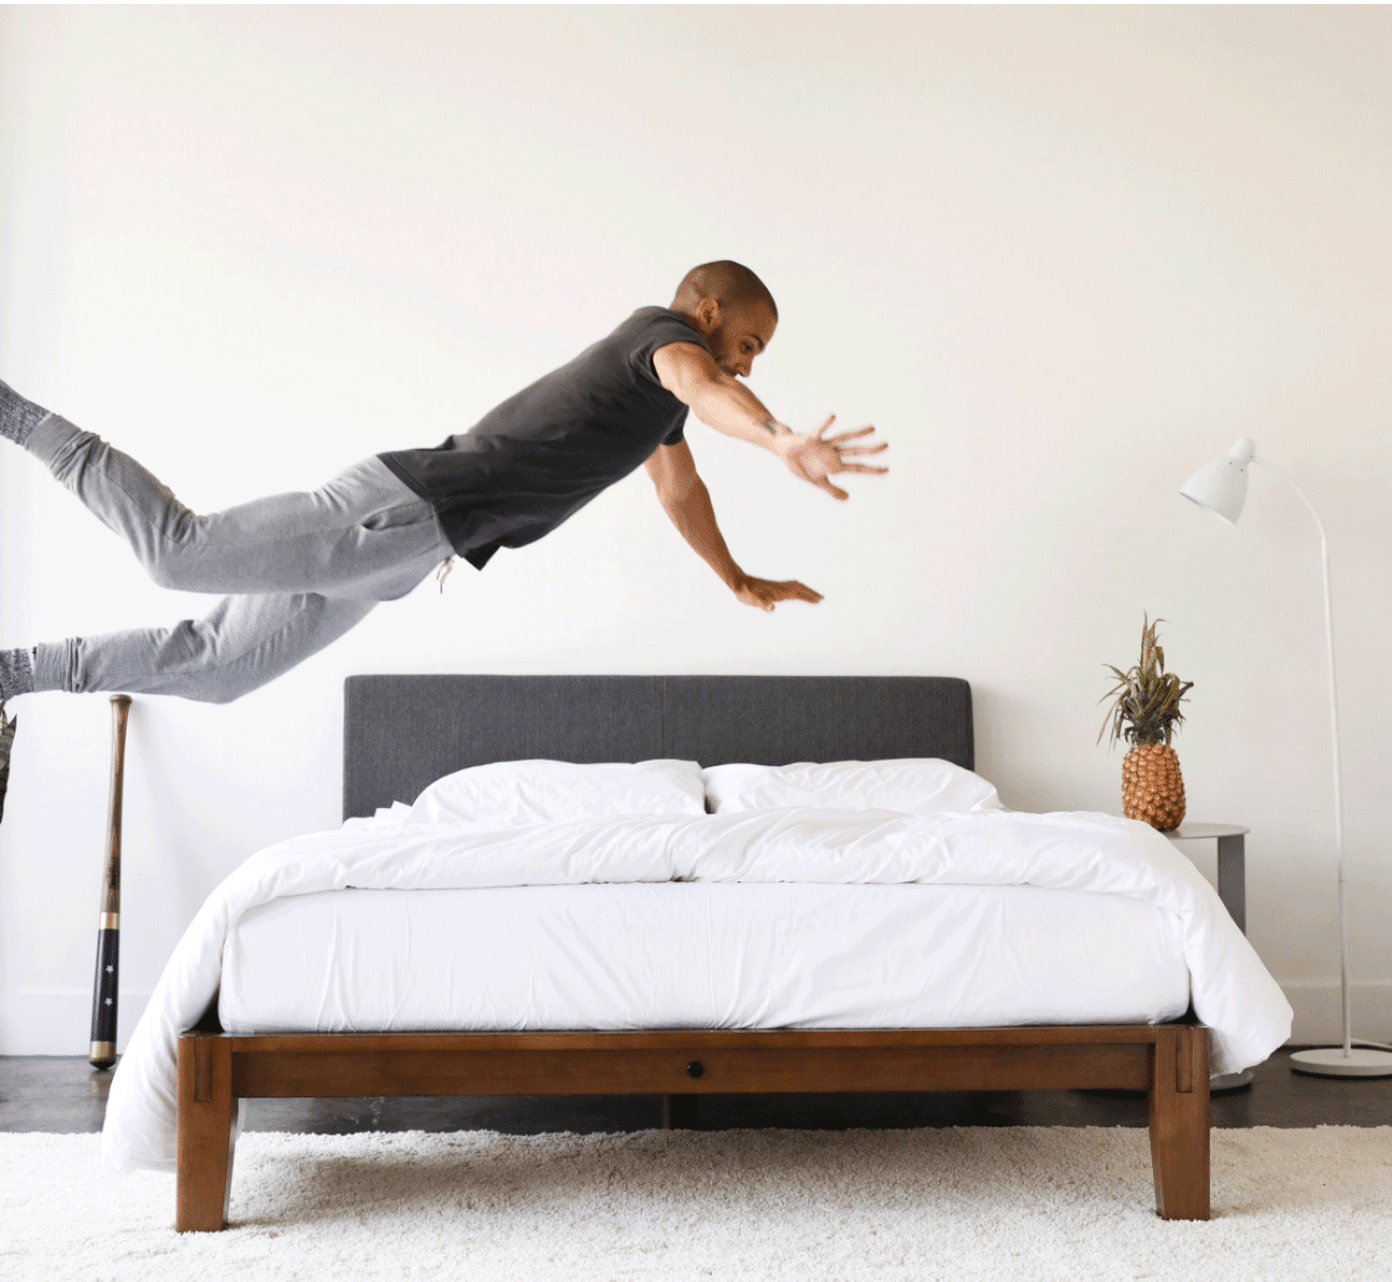 Top 12 Sy Bed Frames For Active, How To Level A Bed Frame